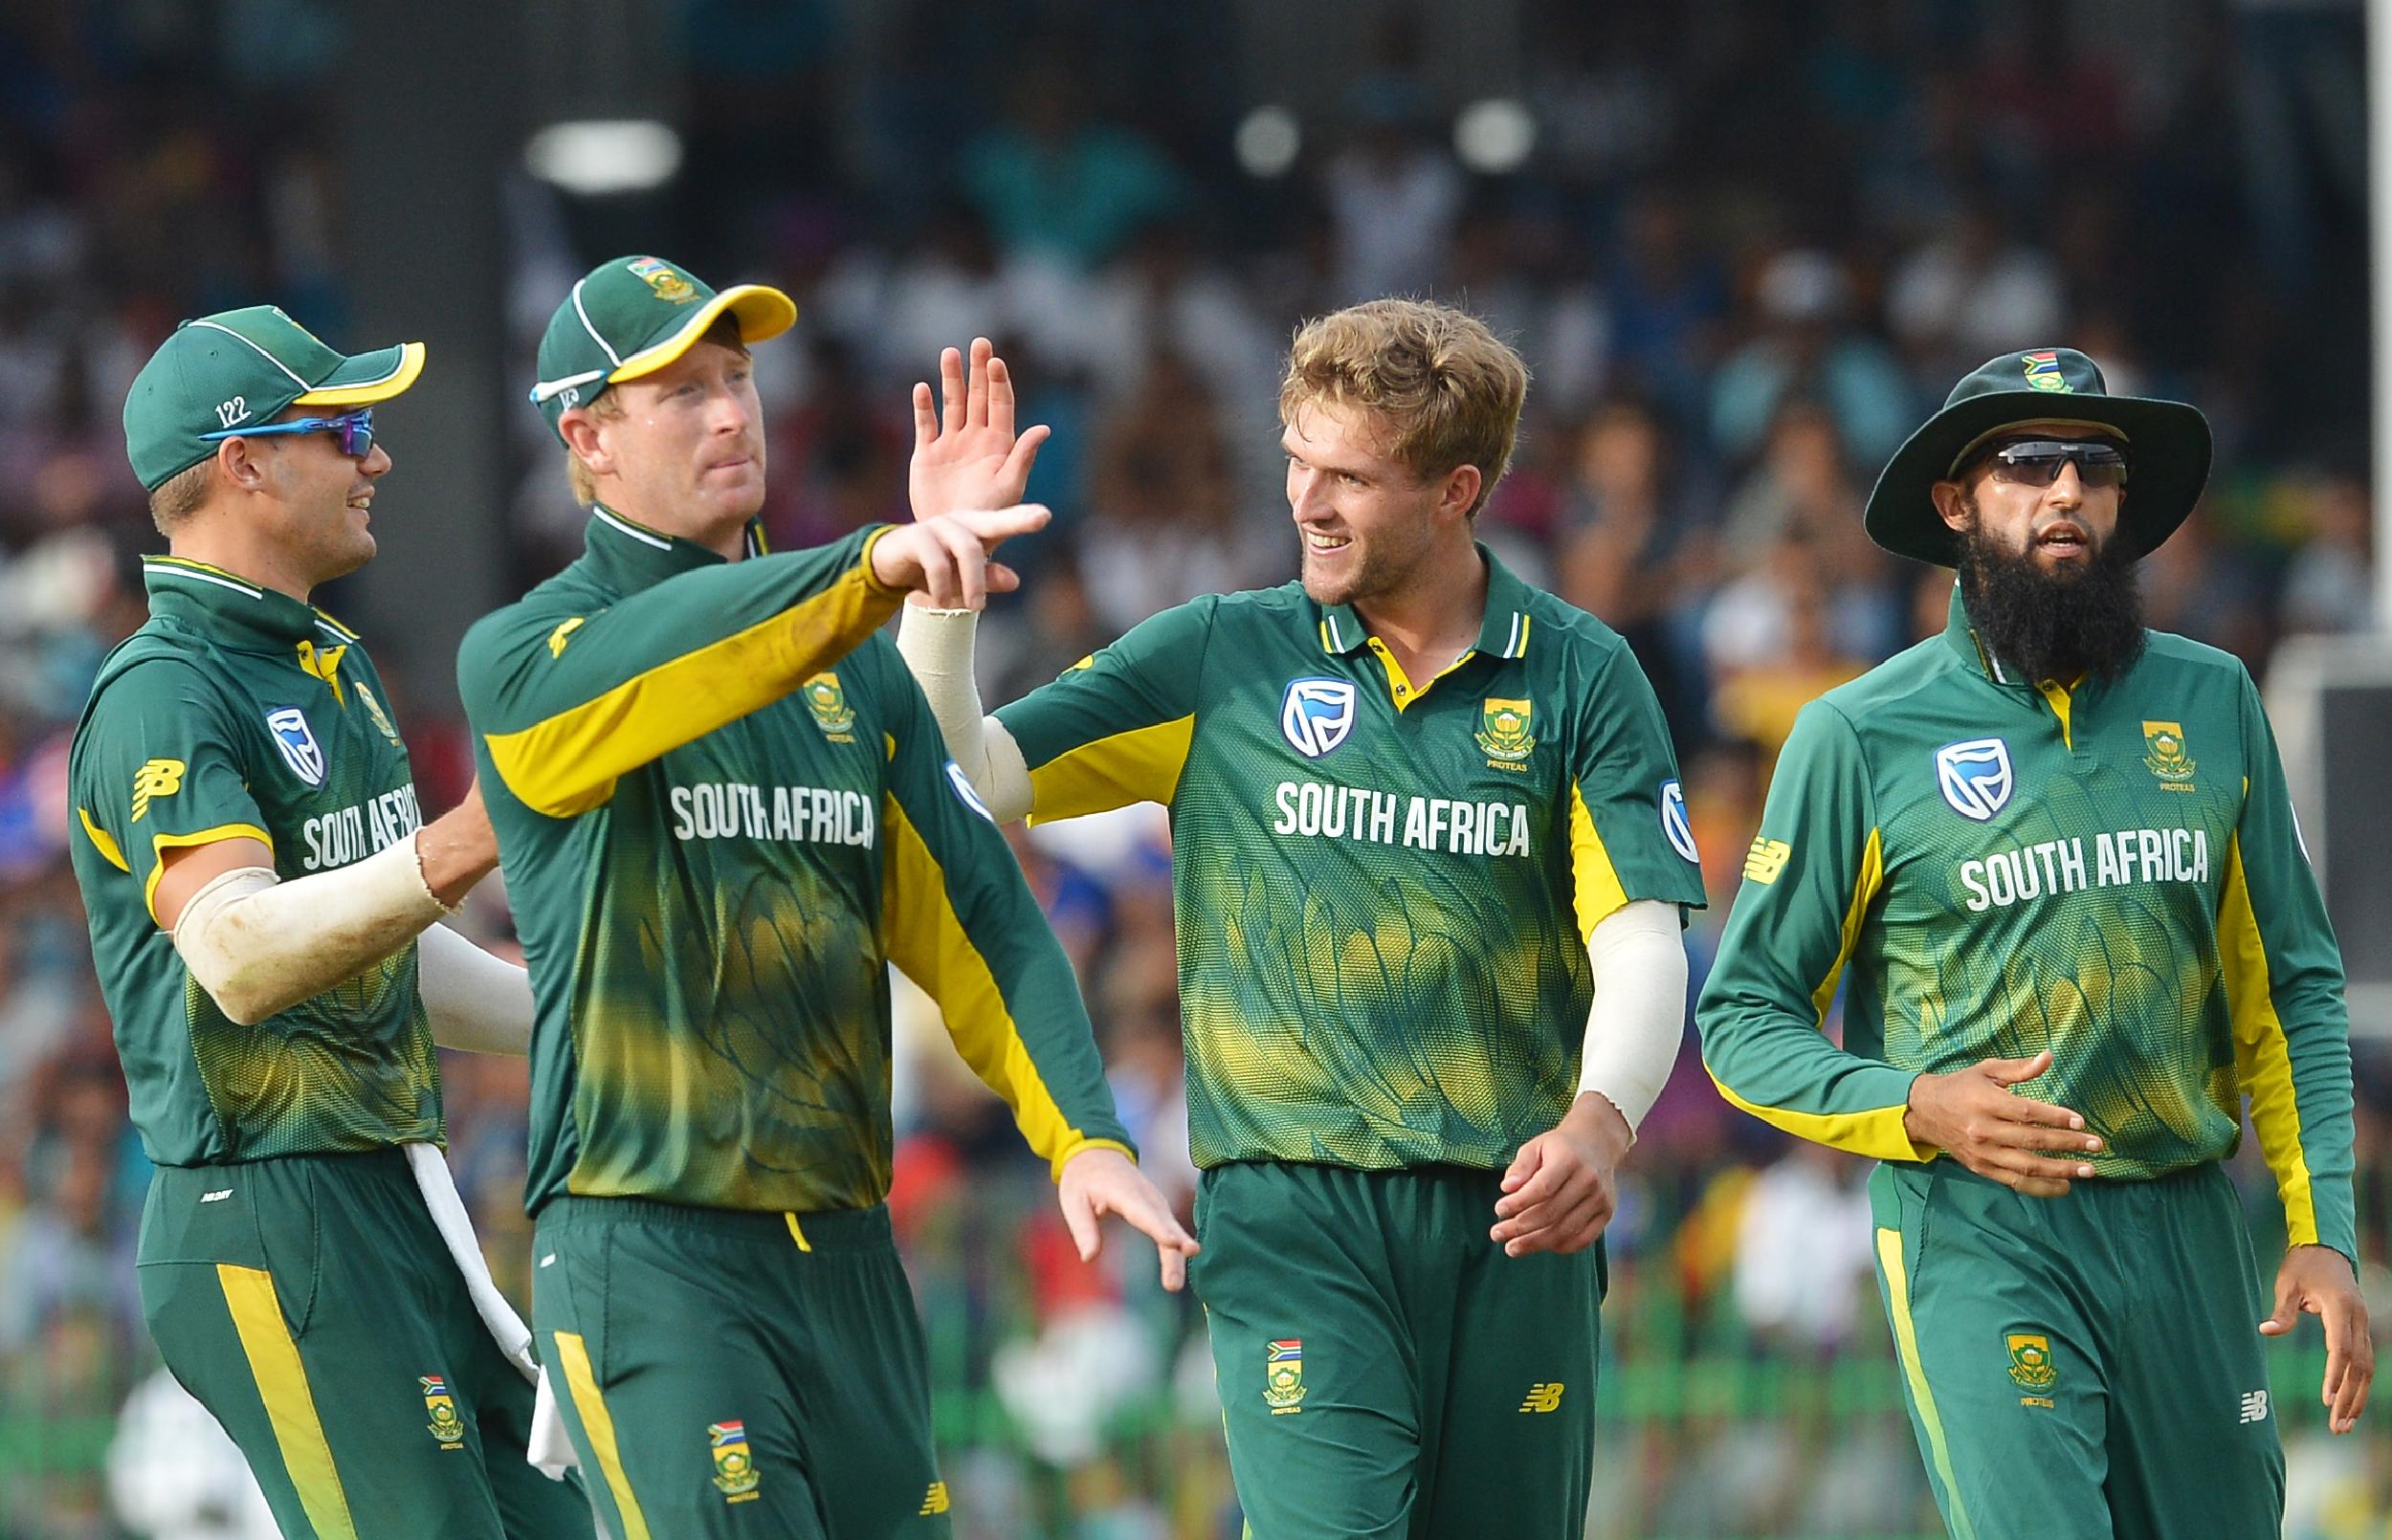 South Africa team world cup 2019